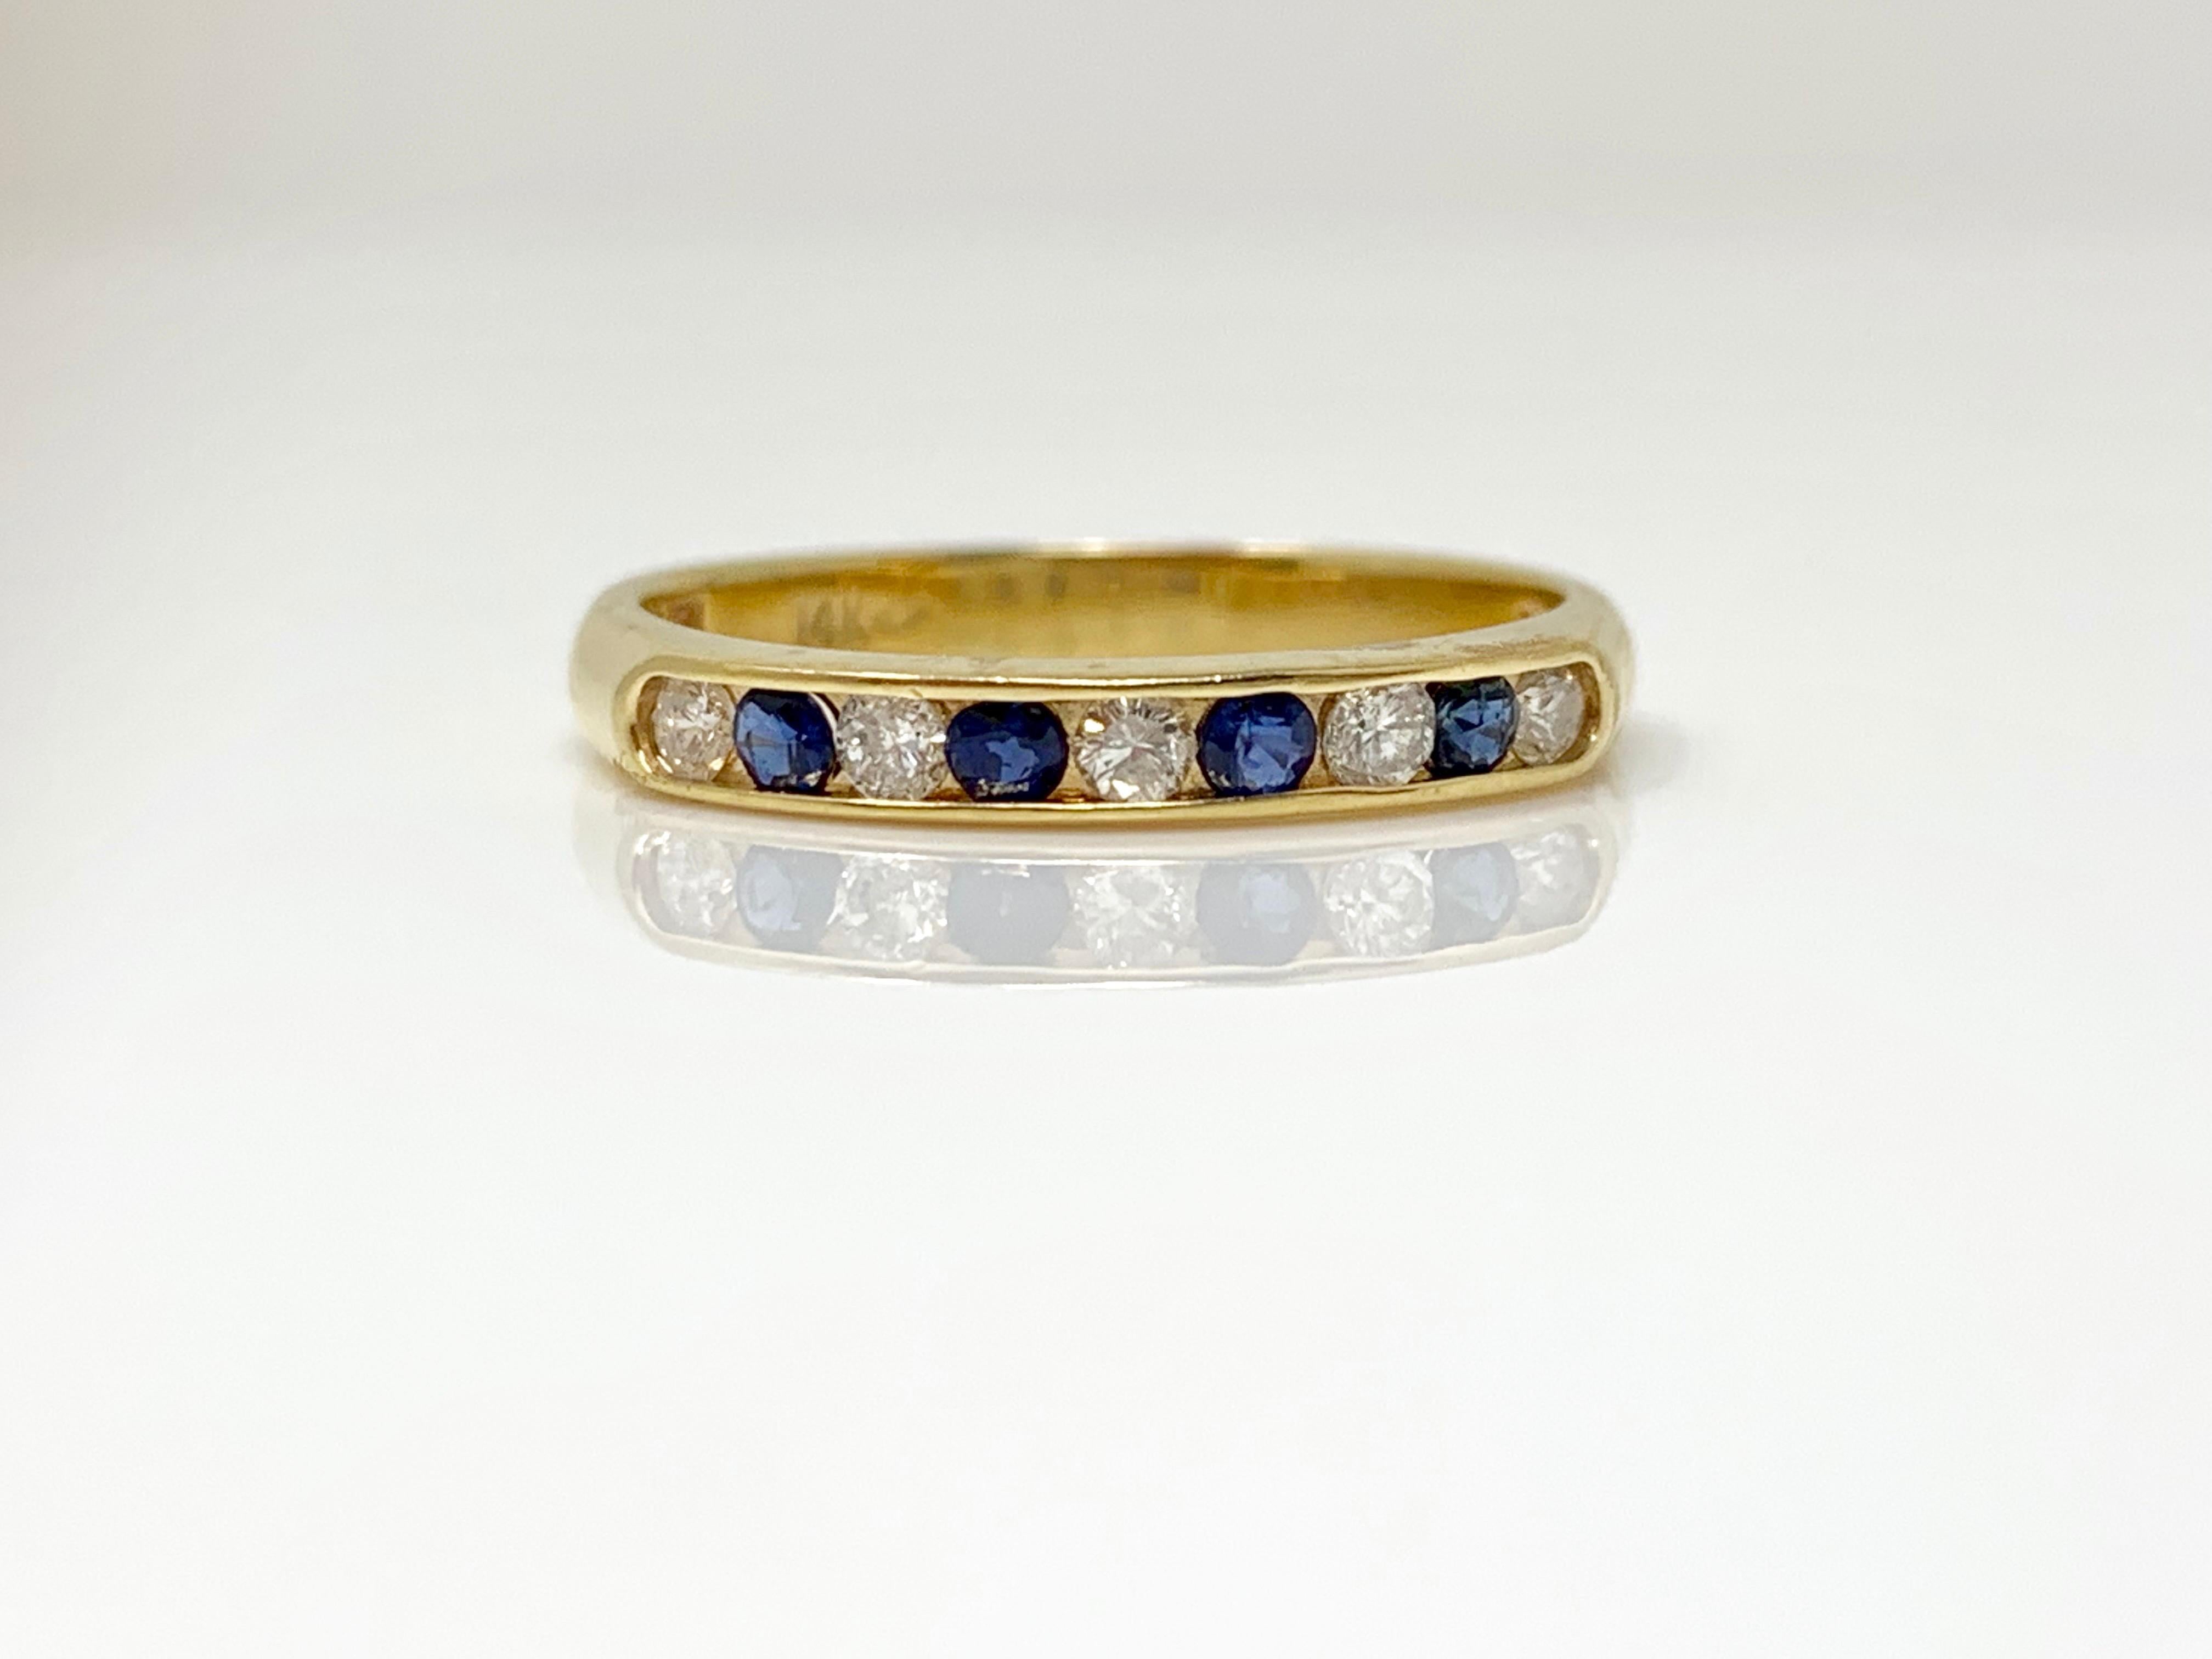 An elegant white diamond and blue sapphire wedding band. 
White Diamond weight : 0.15 carat 
Blue Sapphire weight : 0.20 carat 
Metal : 14k yellow gold 
Ring Size : 5 1/4 and is also available in size 6 and can be resized too in any size. 

